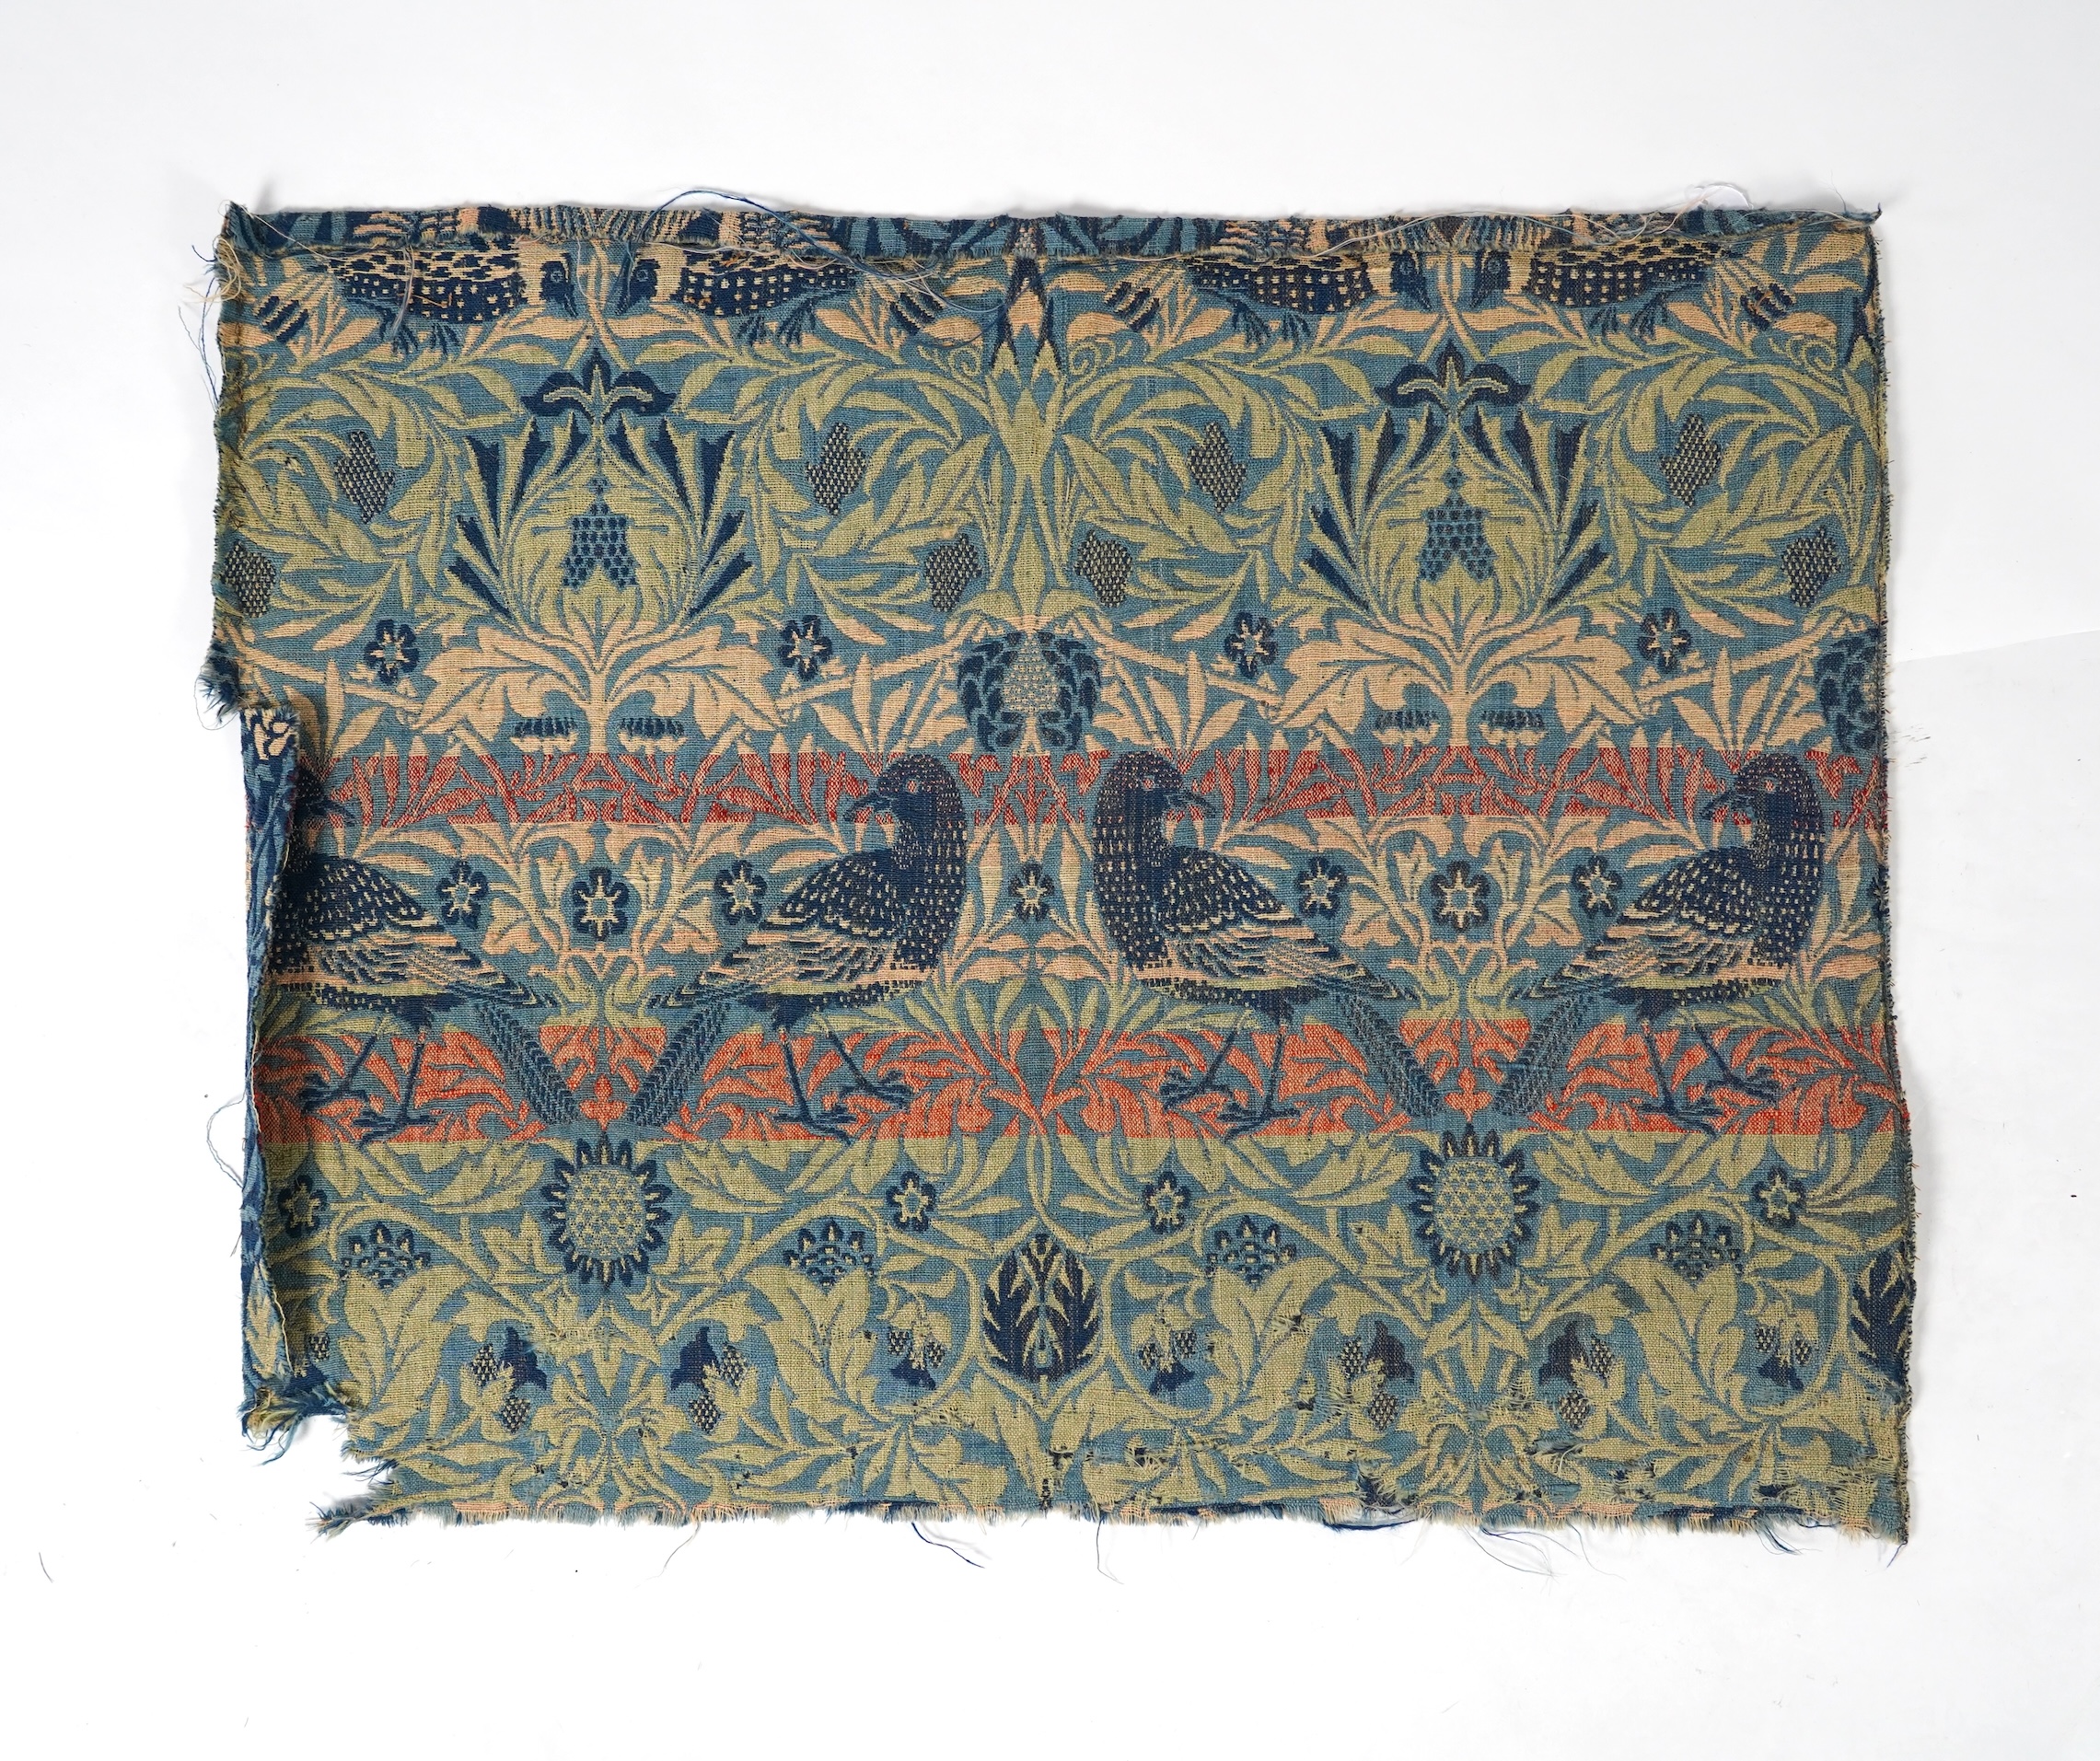 A later sample panel of William Morris ‘Bird’ design, jacquard-woven woollen double cloth, furnishing fabric. Originally manufactured in 1877-1888 by Merton Abbey Workshop for Morris &Co. 91cm x 71cm